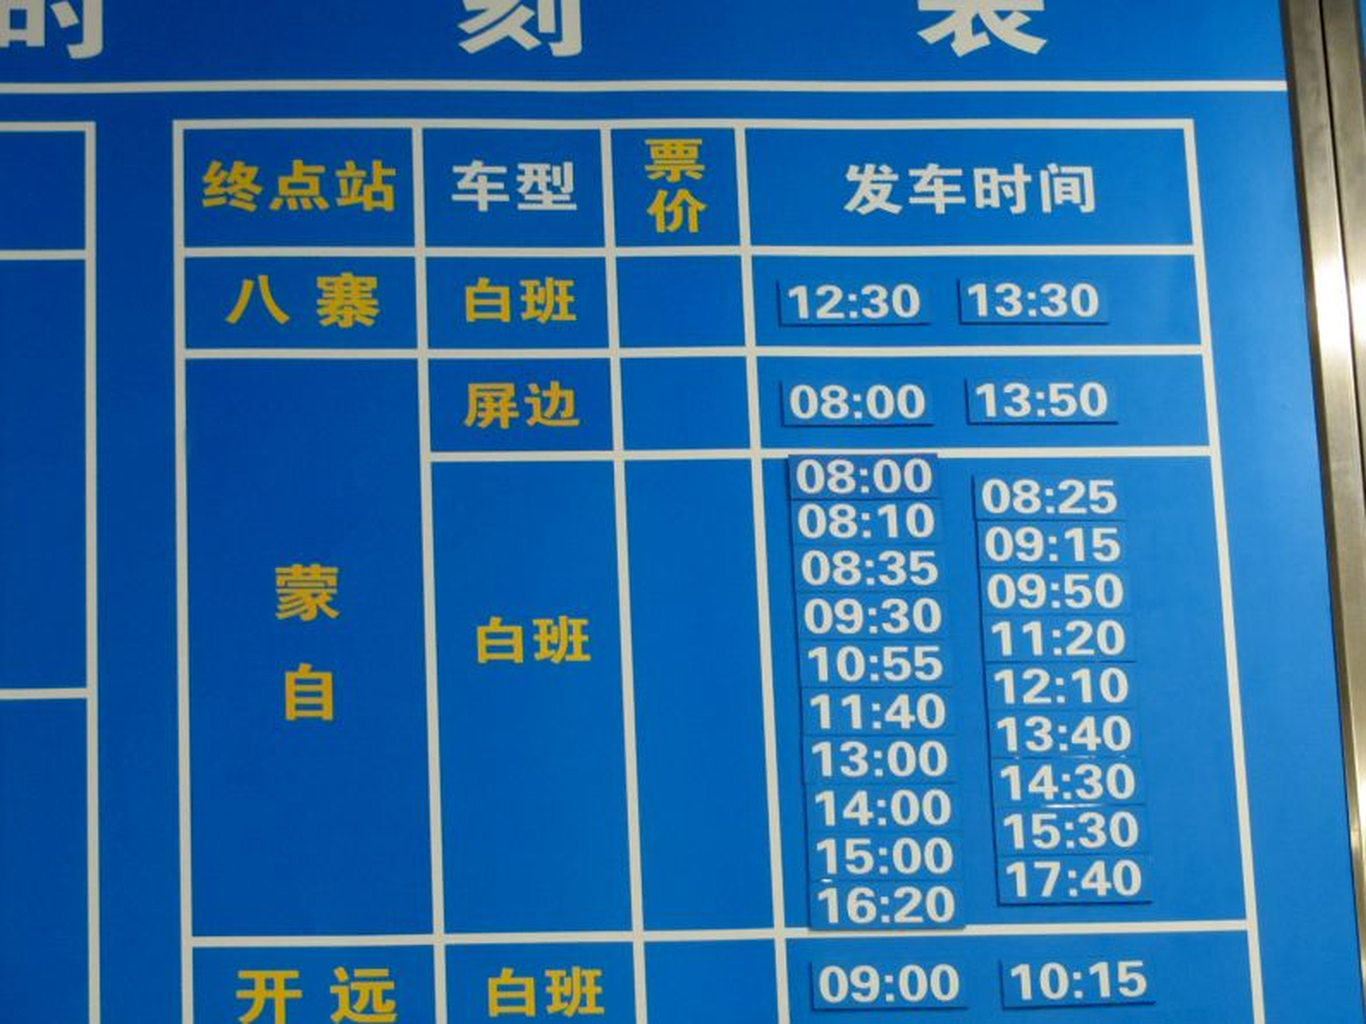 Picture: With the opening of the expressway to Mengzi Hekou is now much better connected with travel time to Kunming down to 8 hours. Busses go to Mengzi, Gejiu, Maguan, Wenshan, Jinping, Yuanyang, Jianshui and local destinations. 